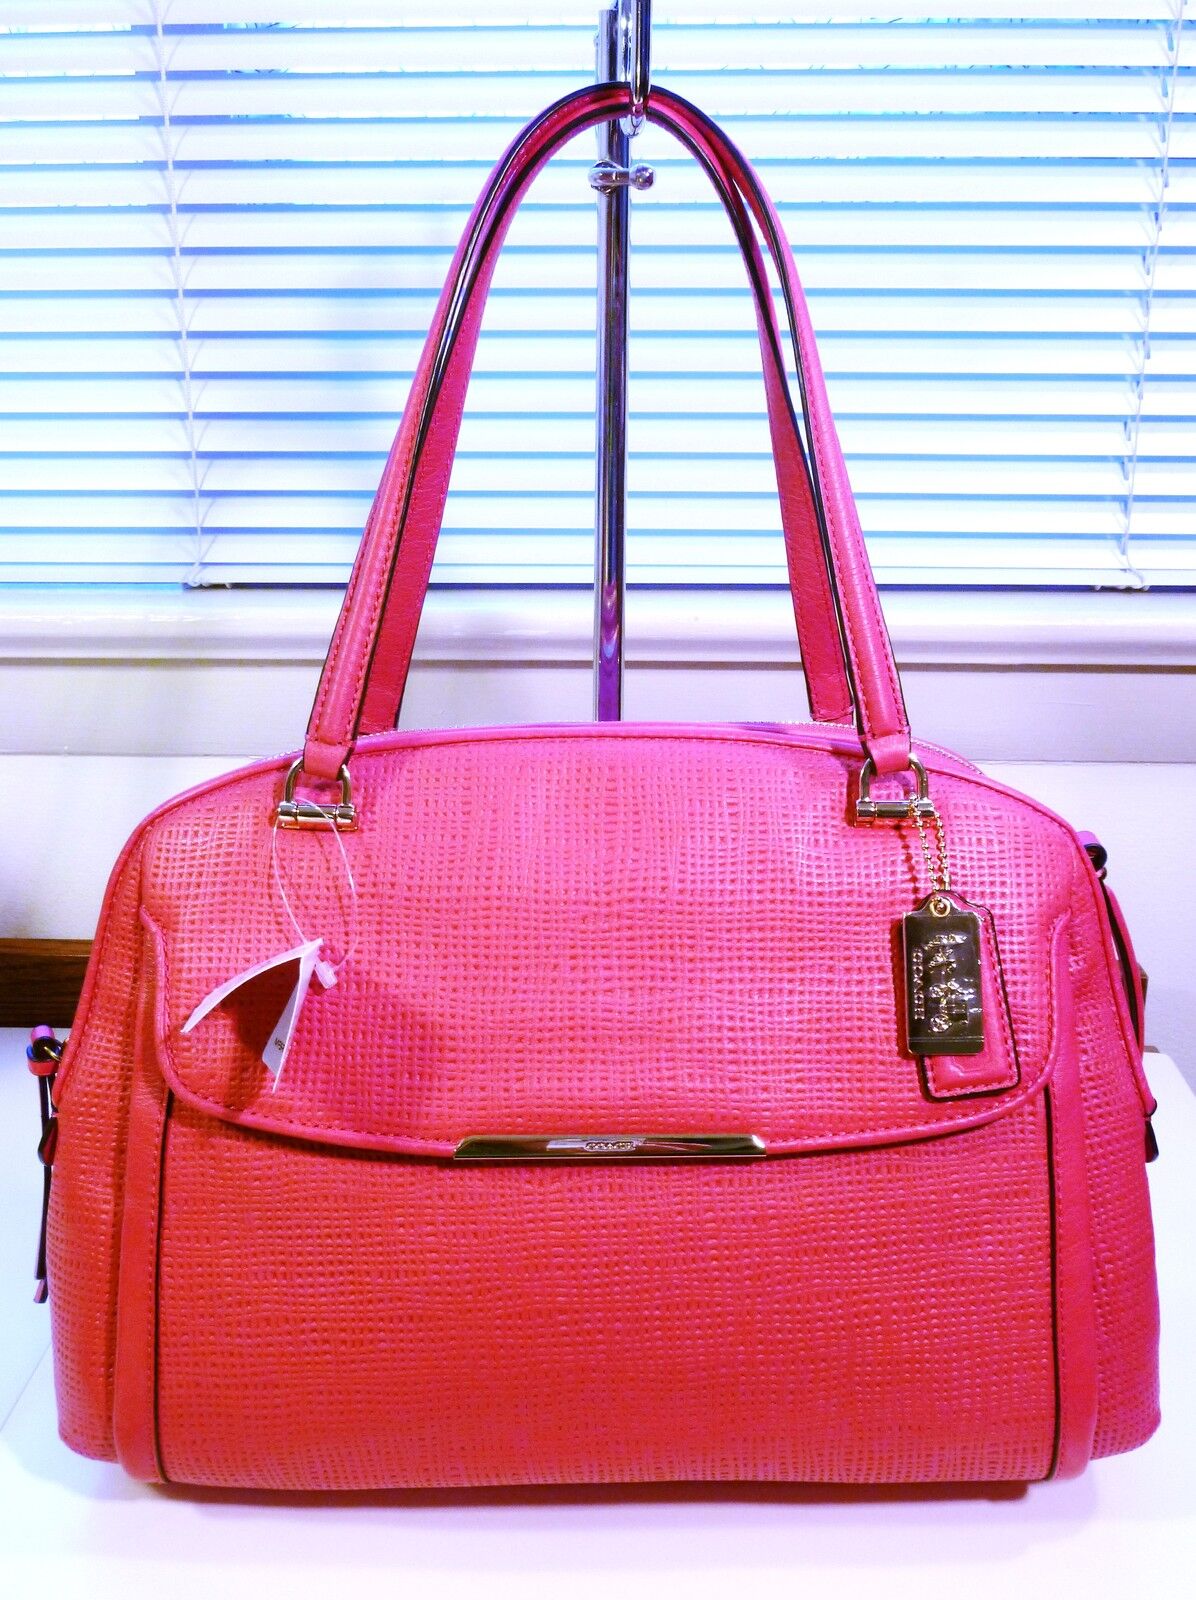 NWT Coach 30092 Madison Embossed Leather Georgie Satchel in Pink Ruby Color $458